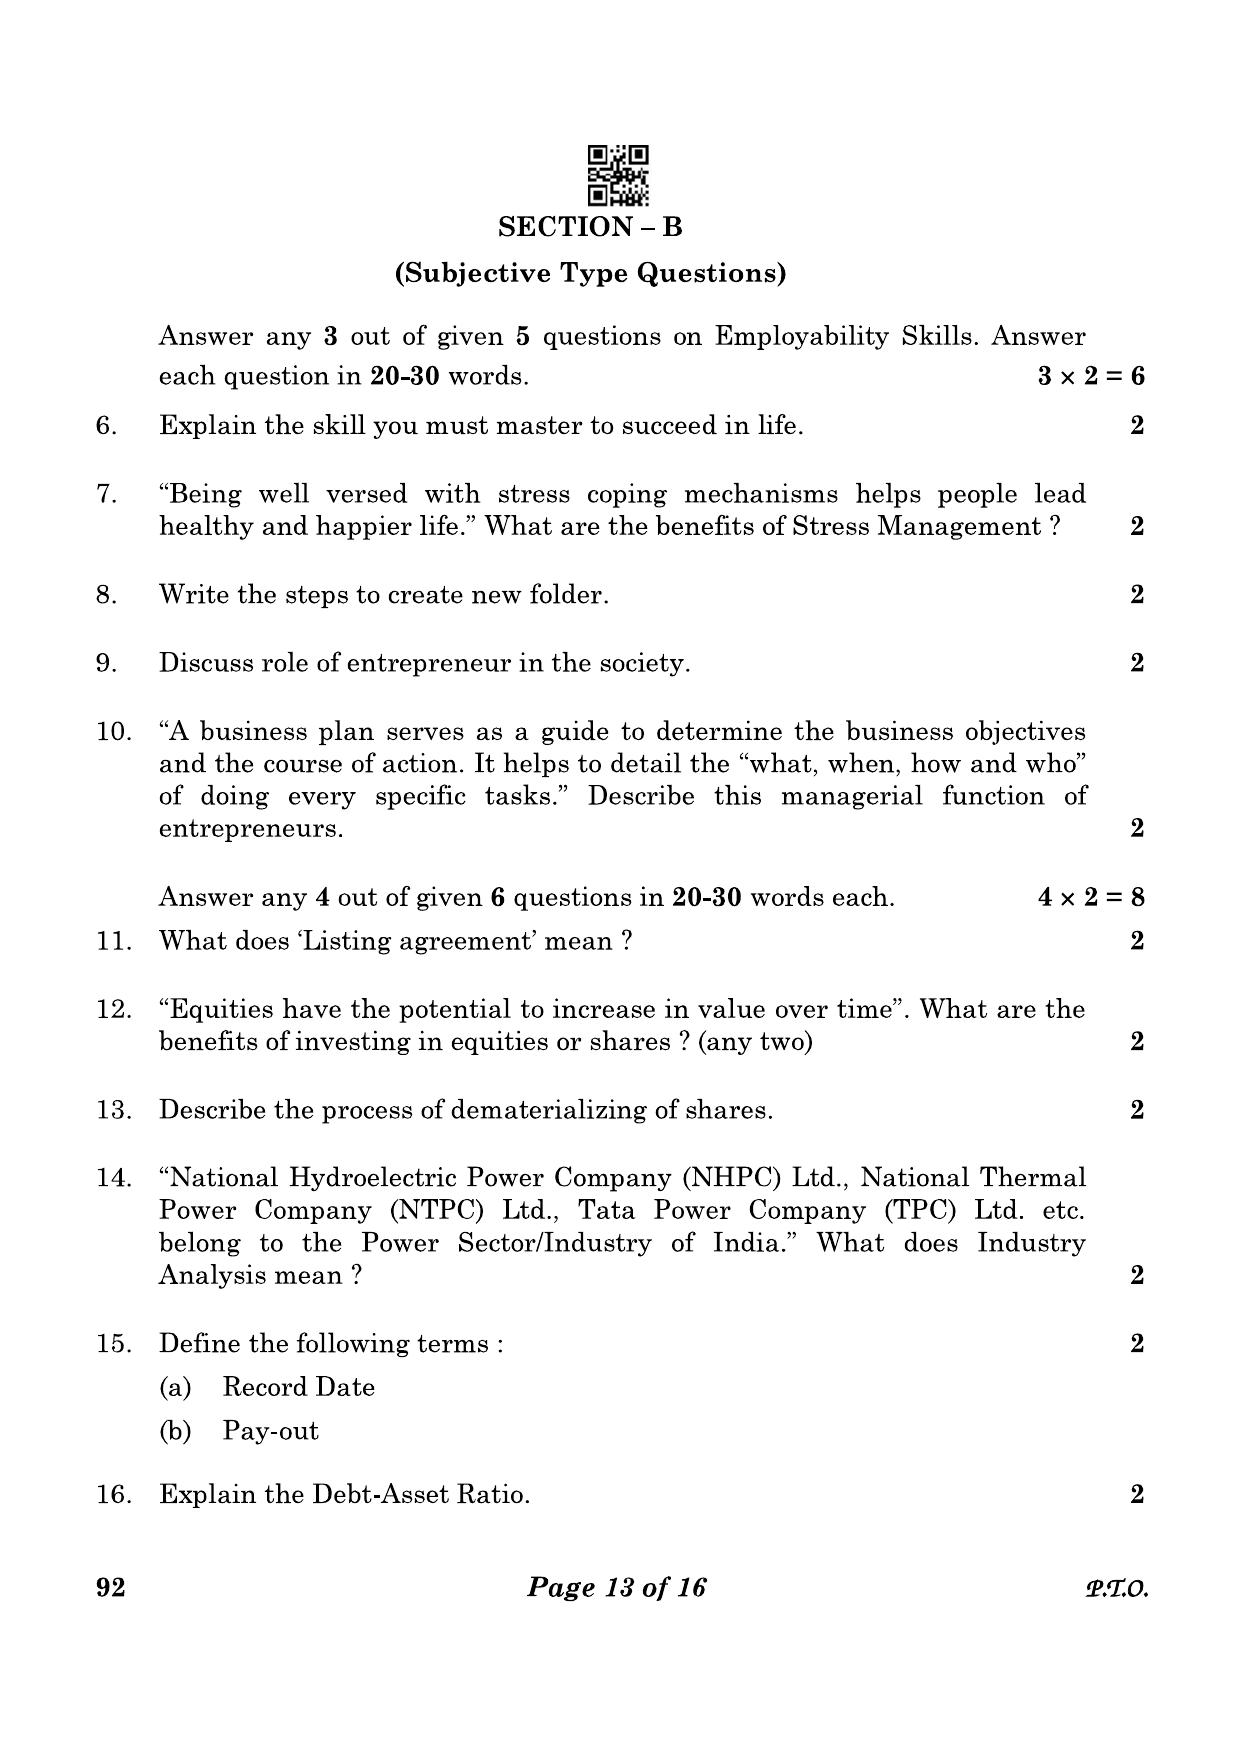 CBSE Class 10 92 Introduction To Financial Markets 2023 Question Paper - Page 13